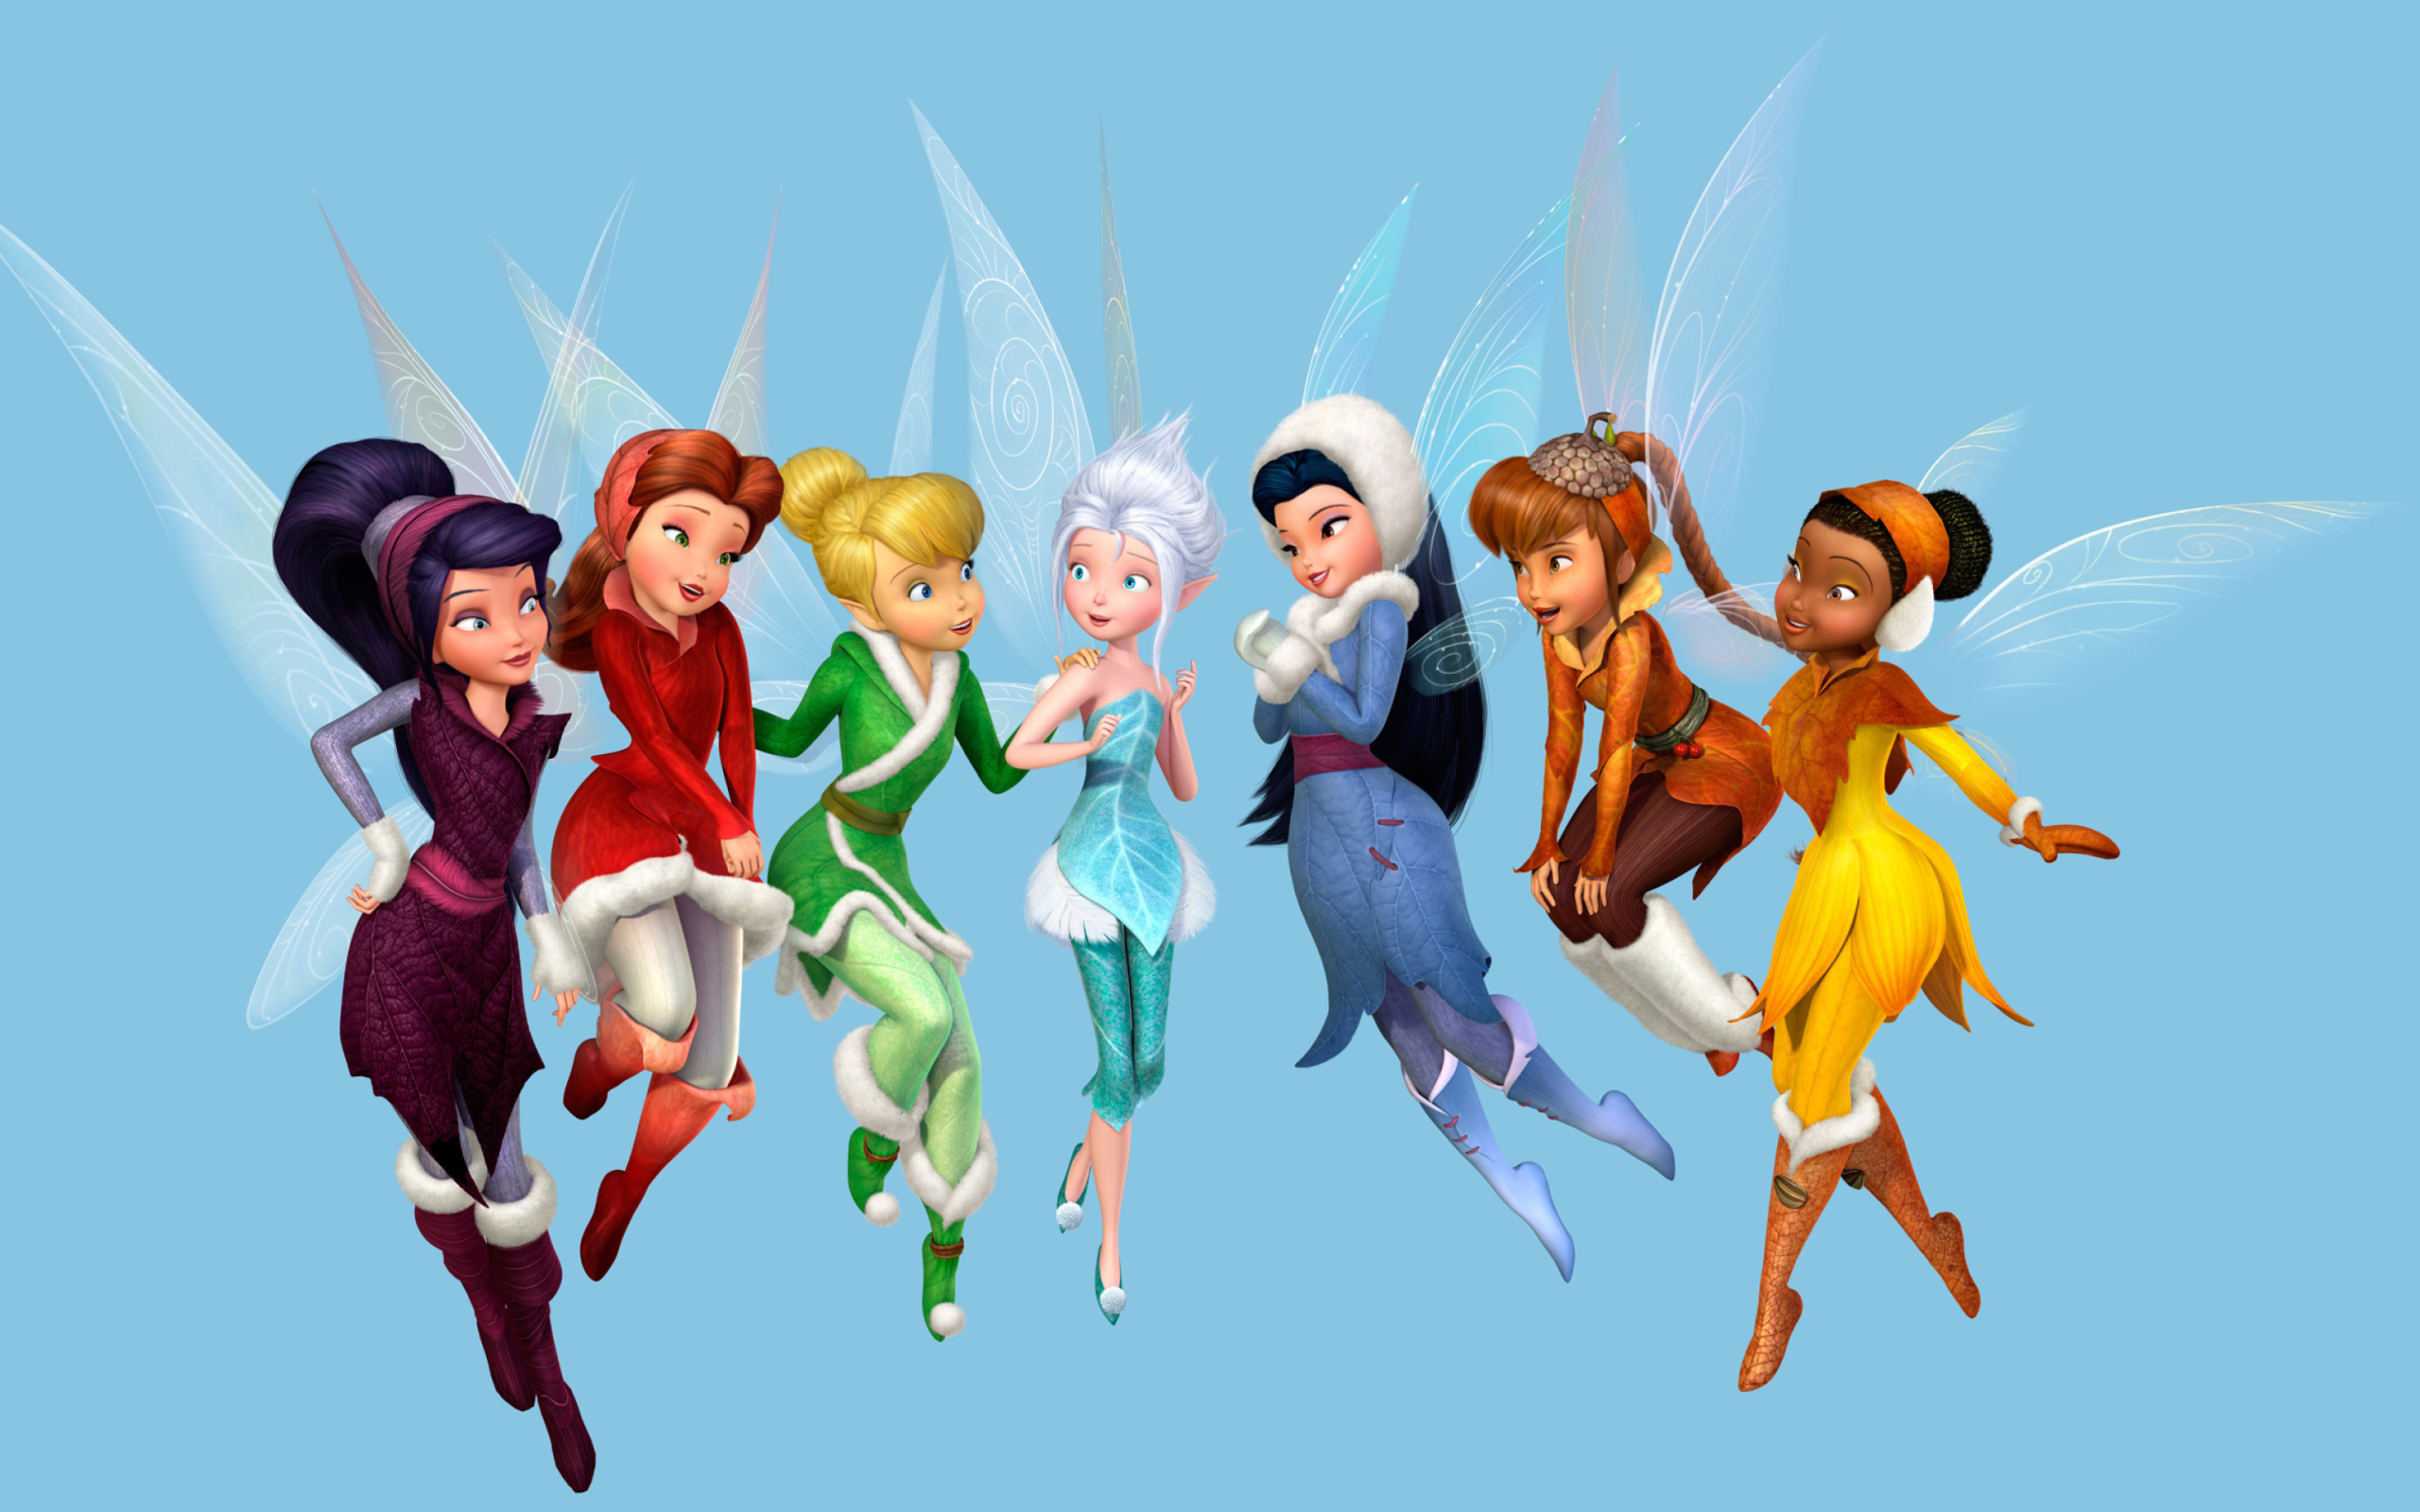 Das Tinkerbell and the Mysterious Winter Woods Wallpaper 2560x1600